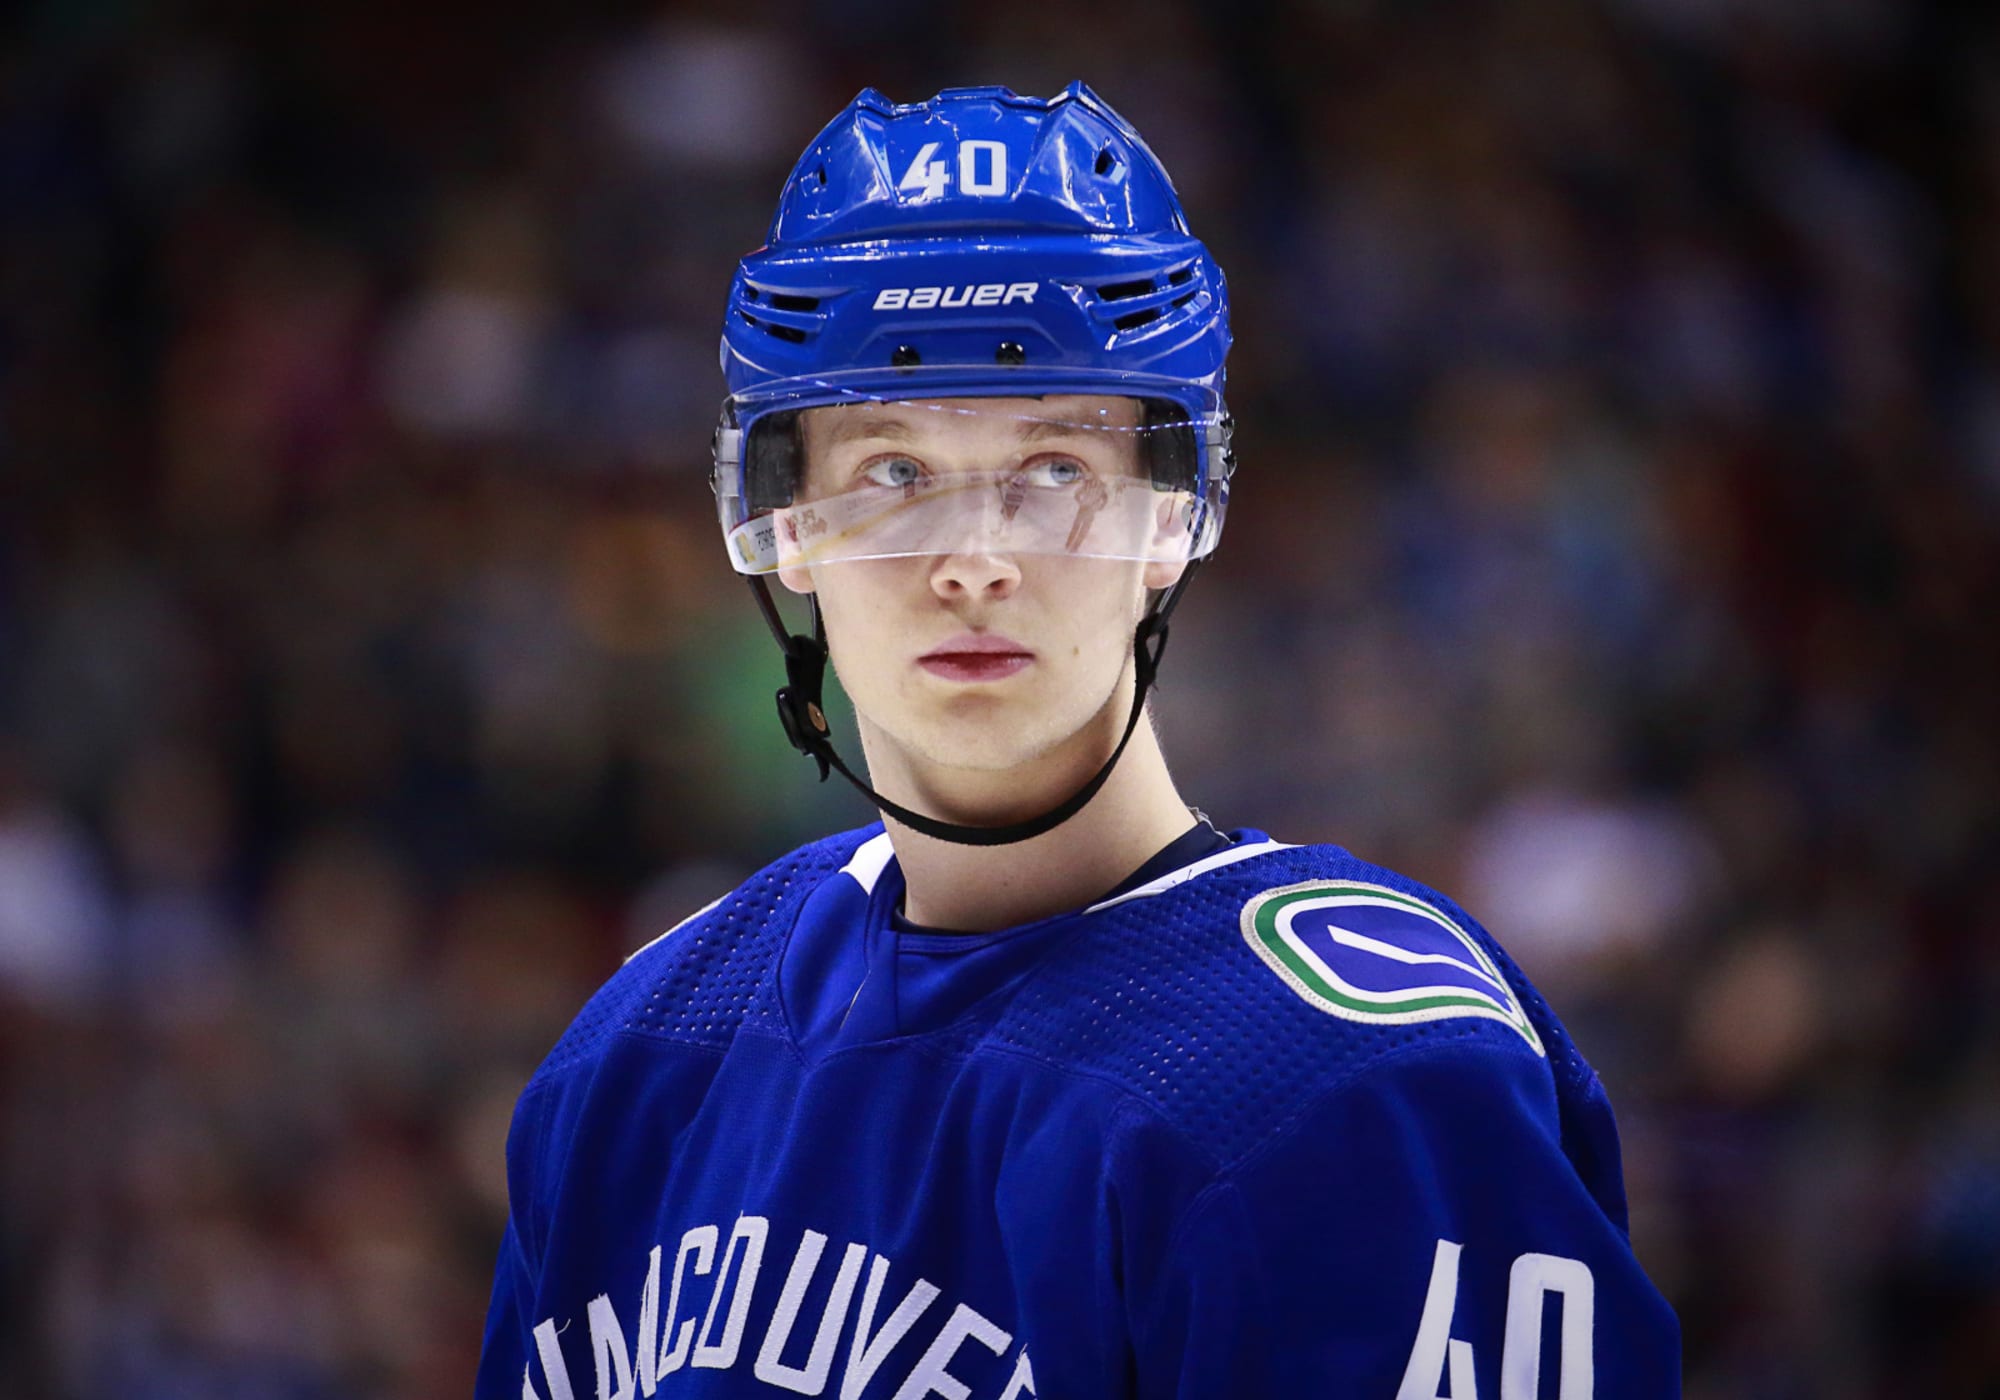 Elias Pettersson selected to represent the Vancouver Canucks at